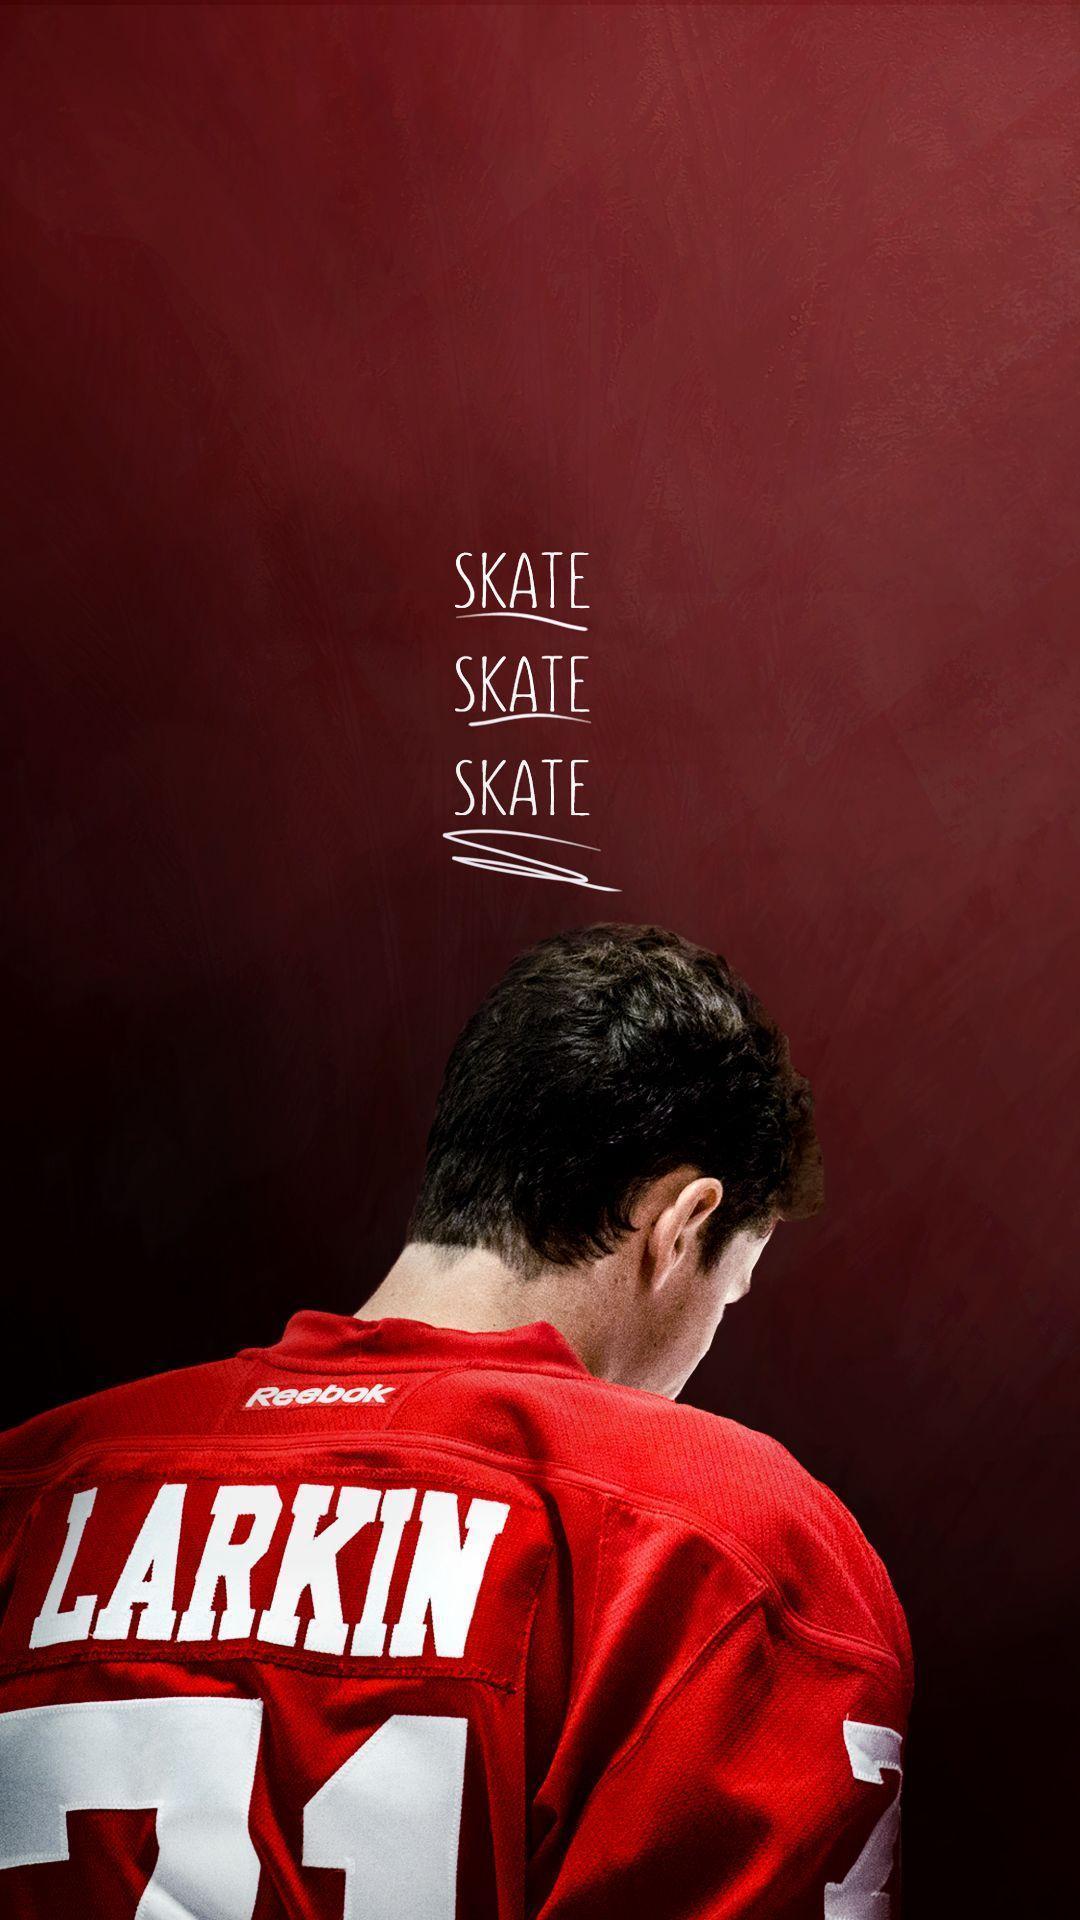 Here's the Dylan Larkin wallpaper I made some more